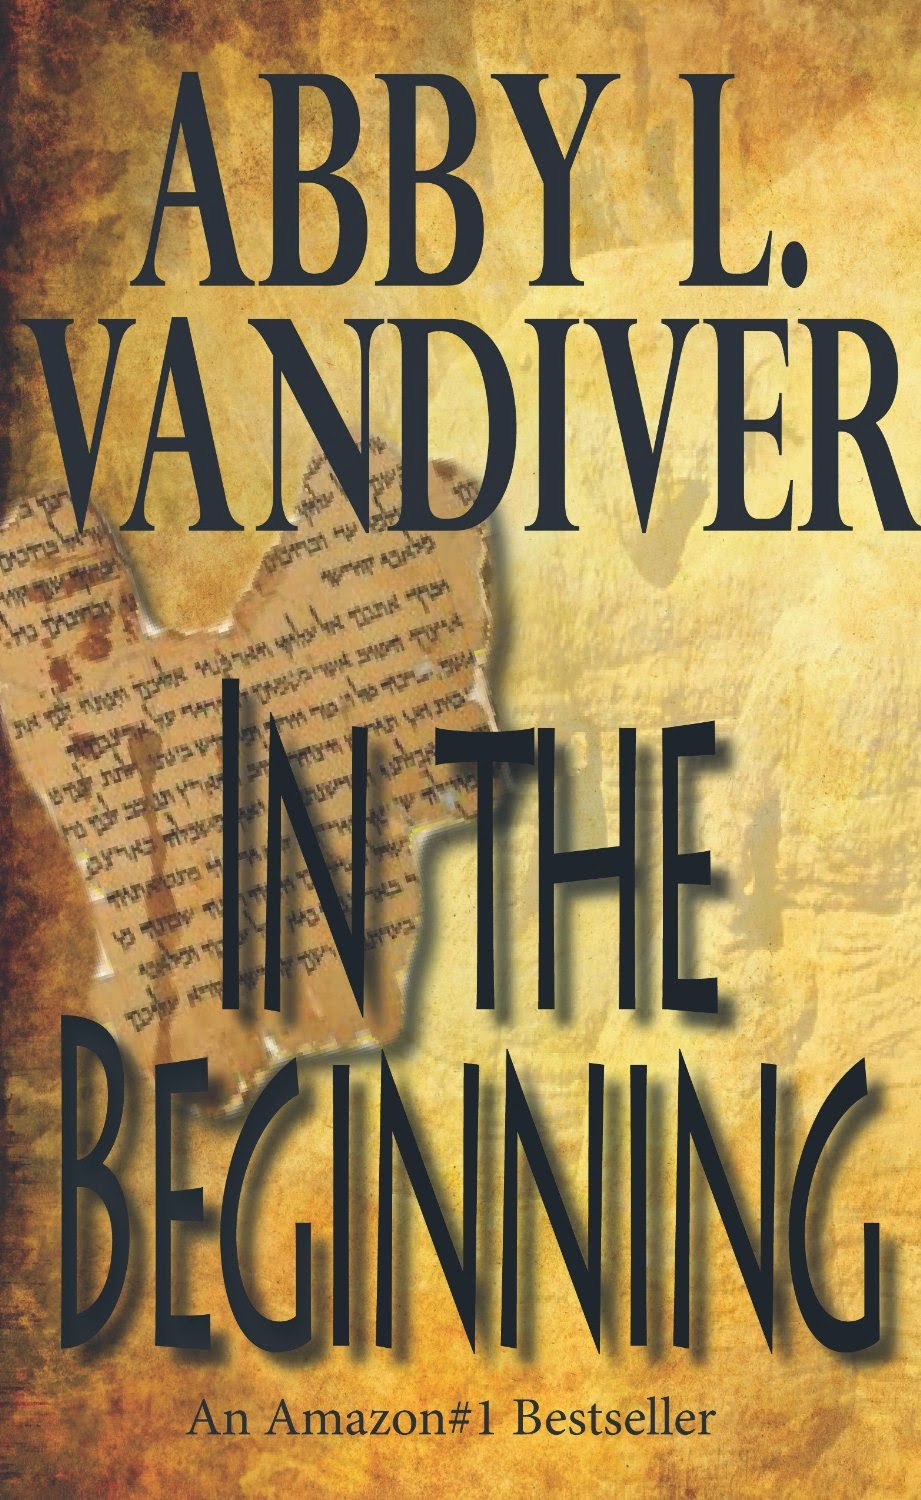 Abby L. Vandiver - In the beginning